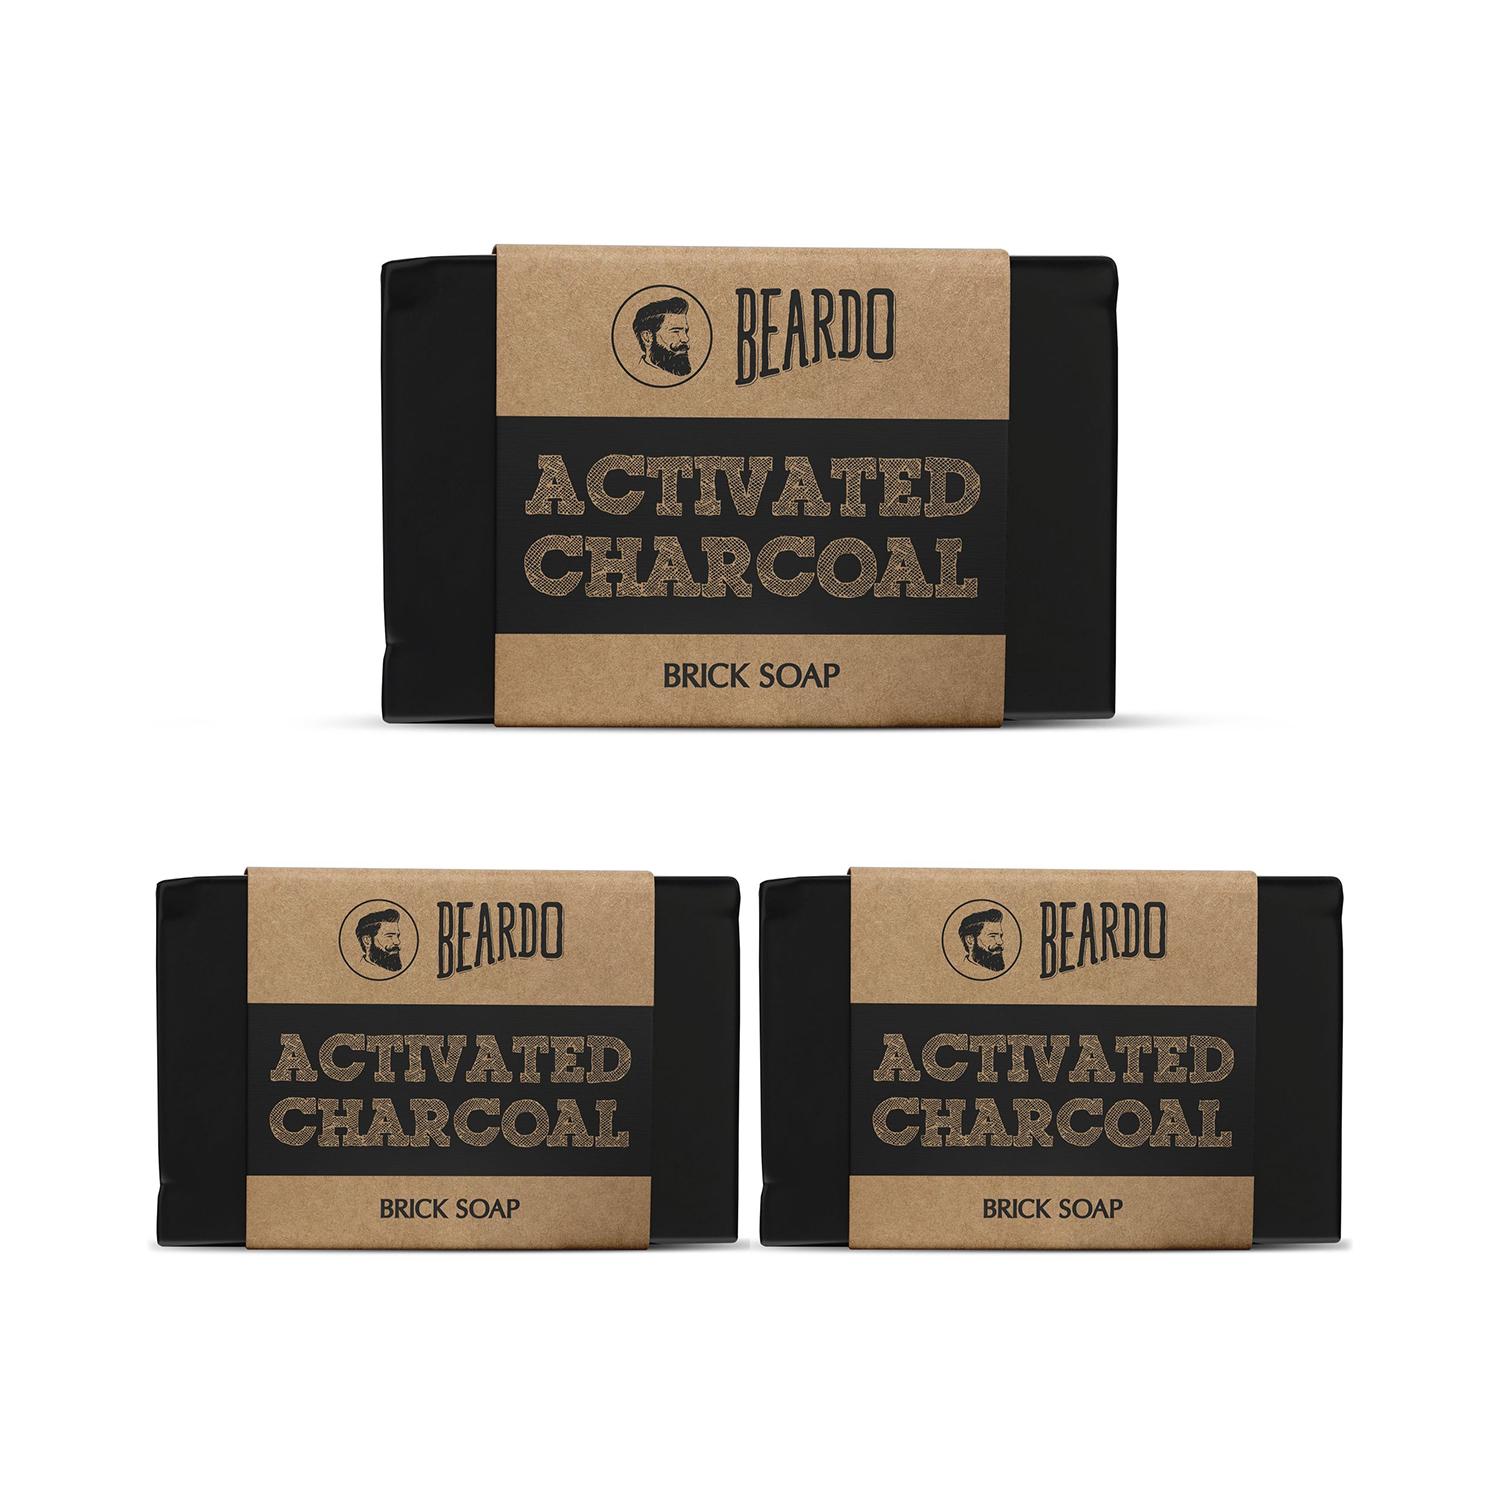 Beardo Activated Charcoal Brick Soap 125gm Combo (Pack of 3)